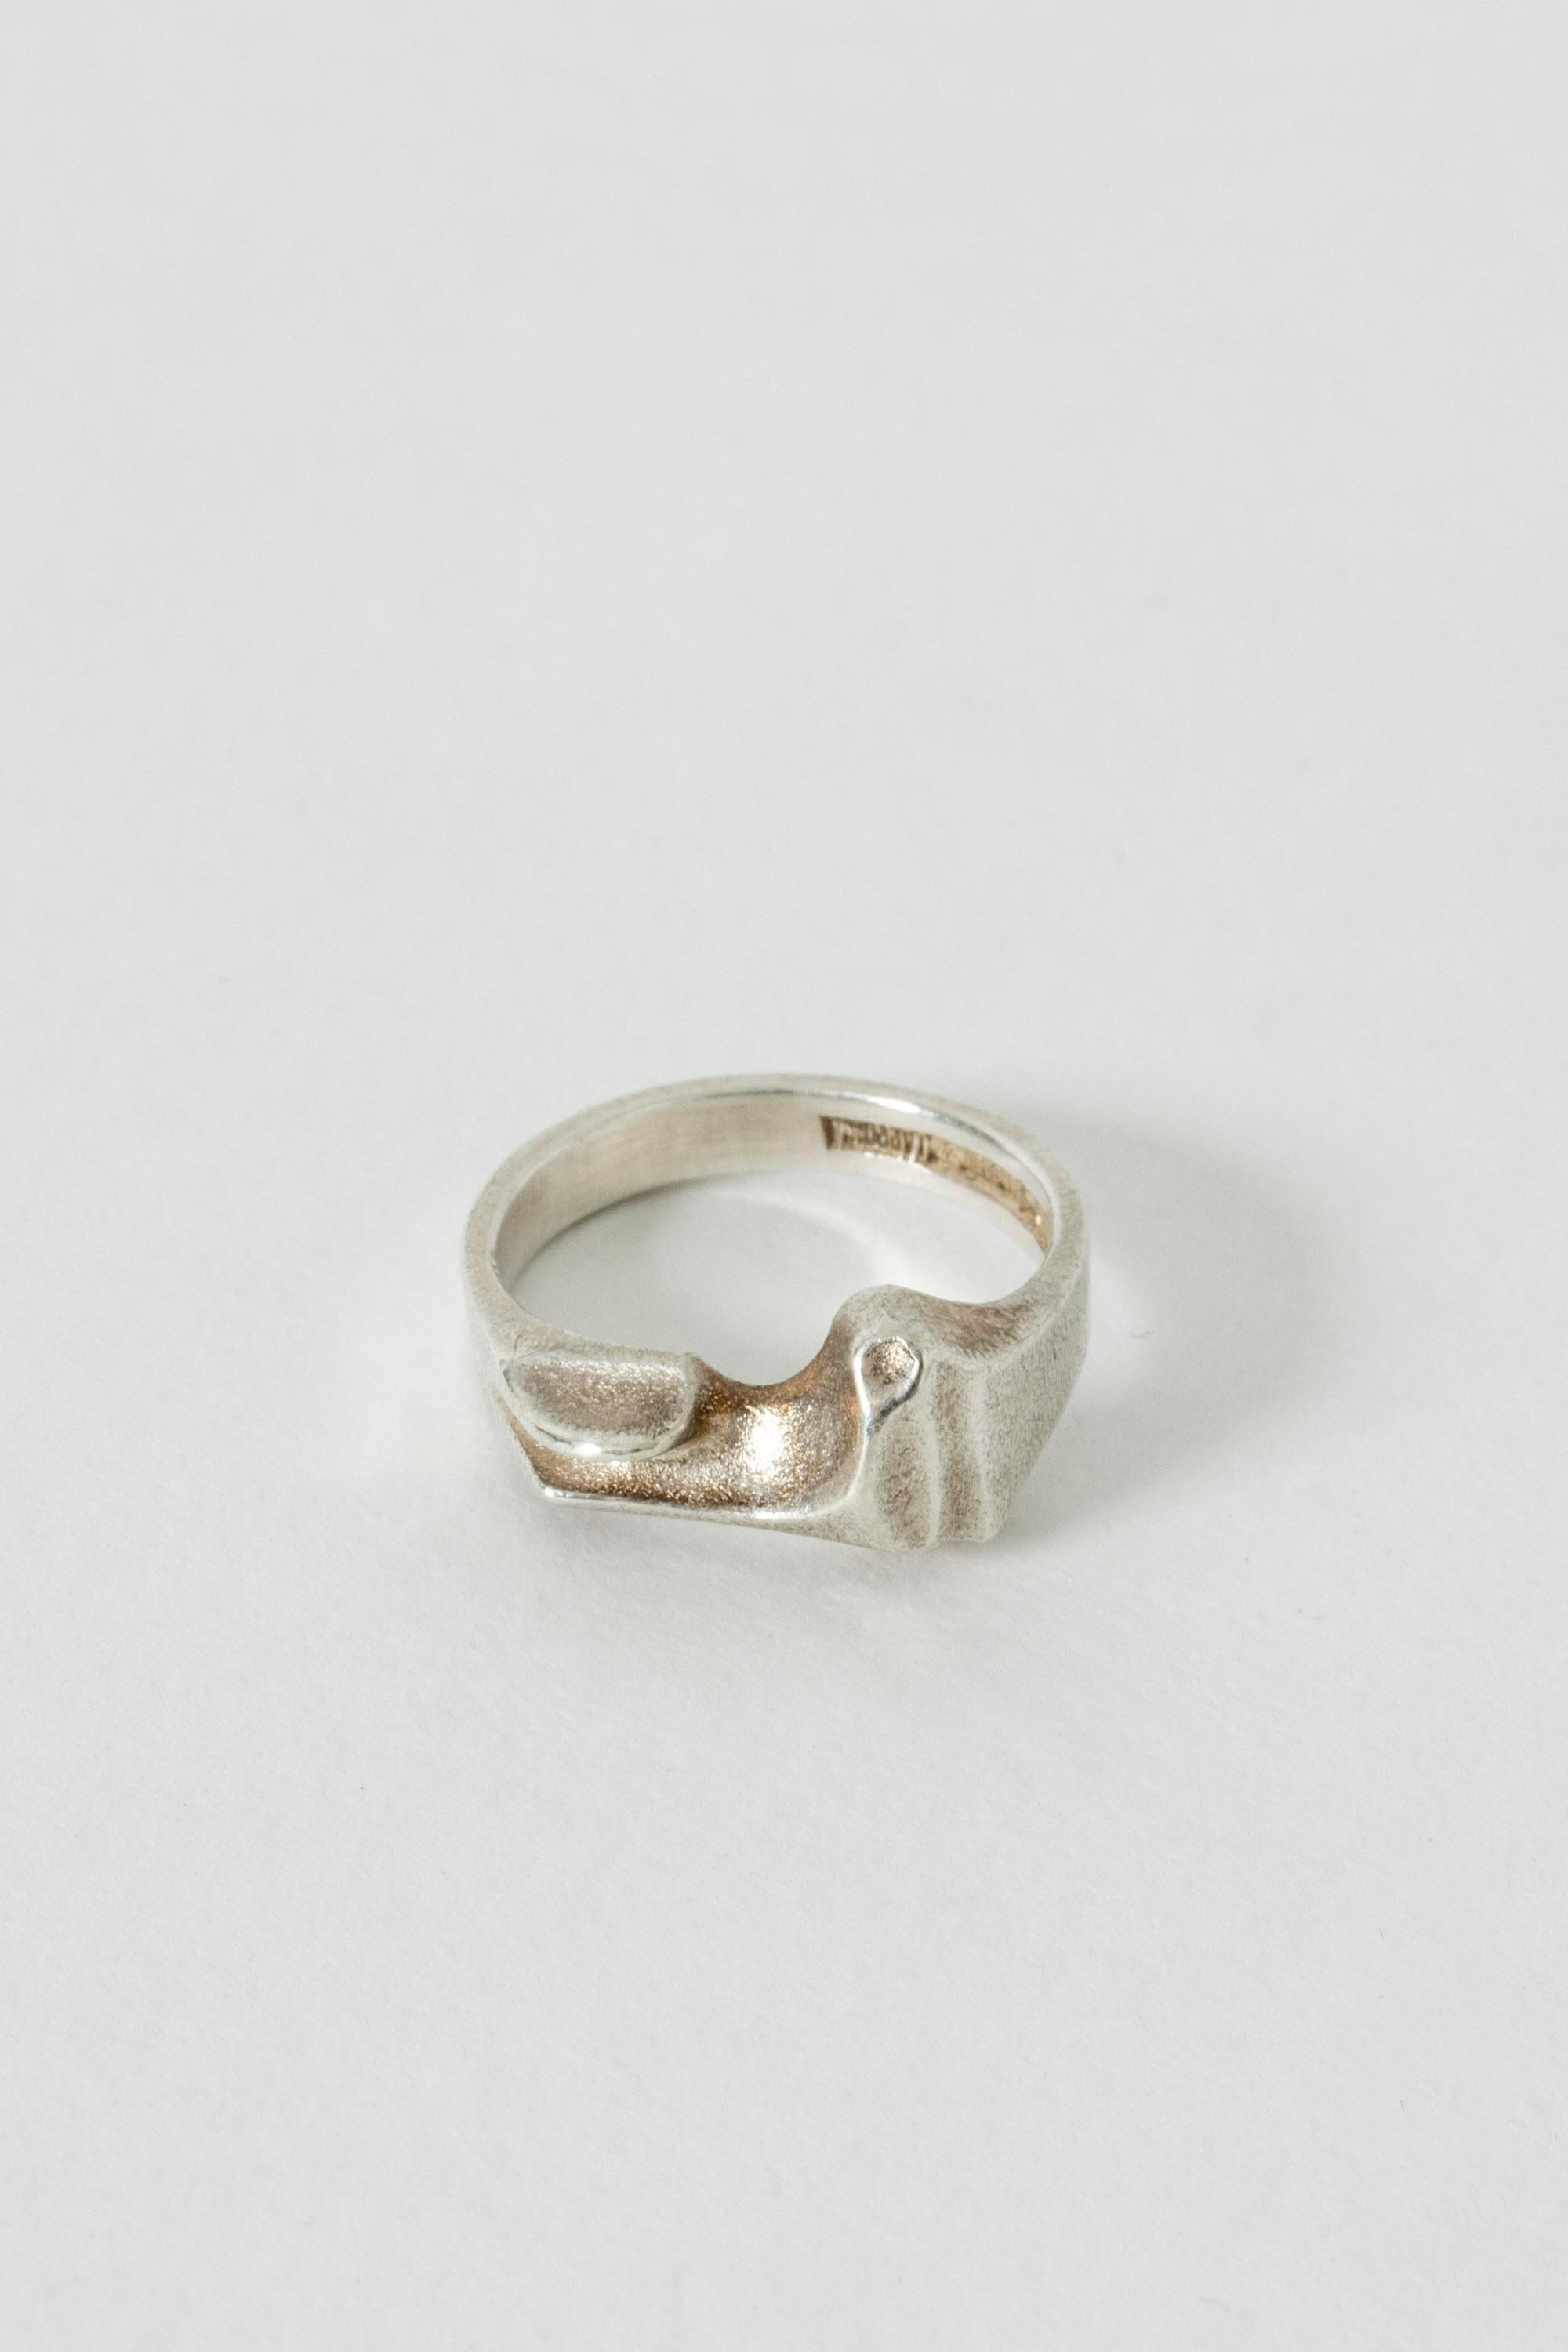 Silver ring by Björn Weckström, model called “Pluto”. Discreet, yet expressive with its organic design. Brushed surface.